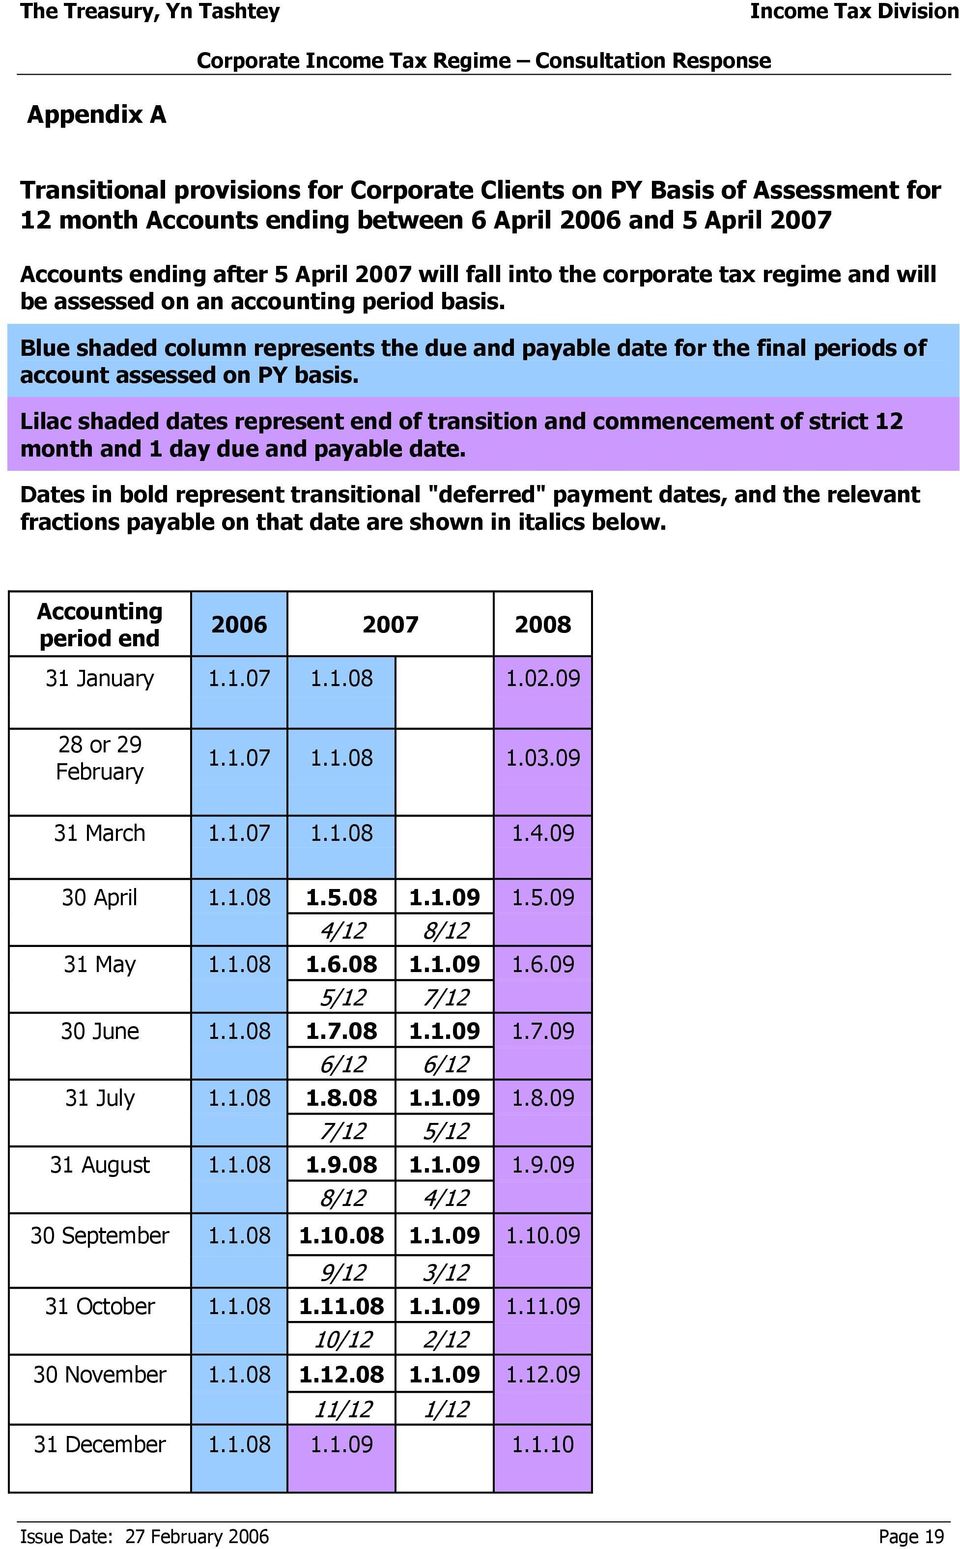 Lilac shaded dates represent end of transition and commencement of strict 12 month and 1 day due and payable date.